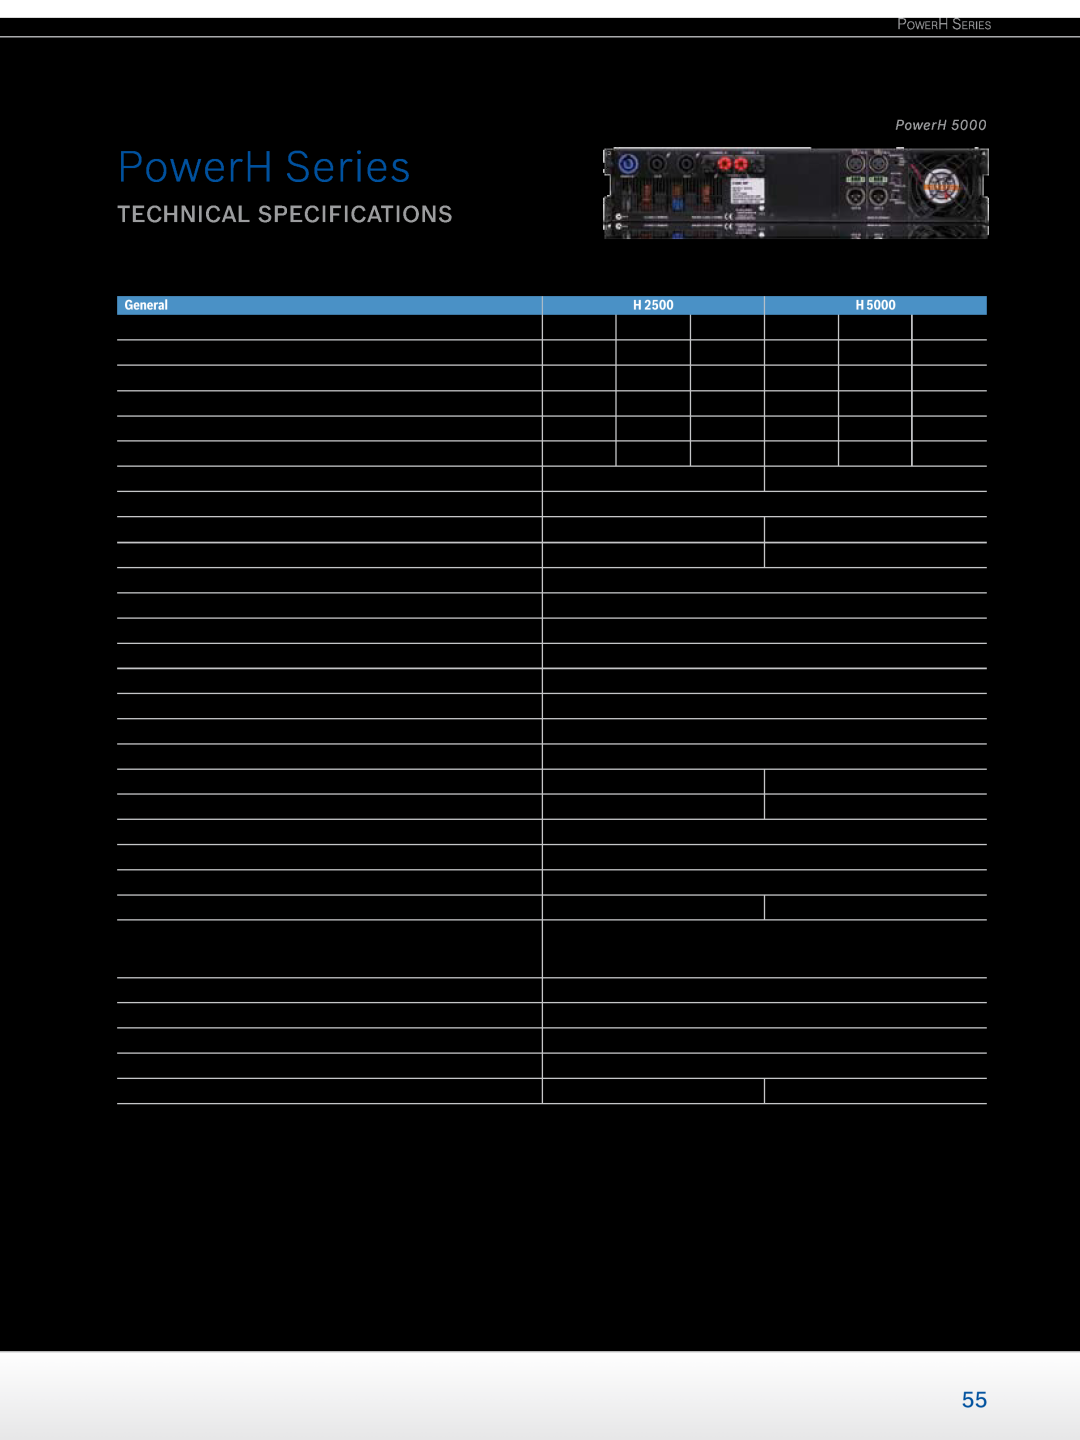 Dynacord Professional Power Amplifiers manual technical specifications, PowerH Series, General 